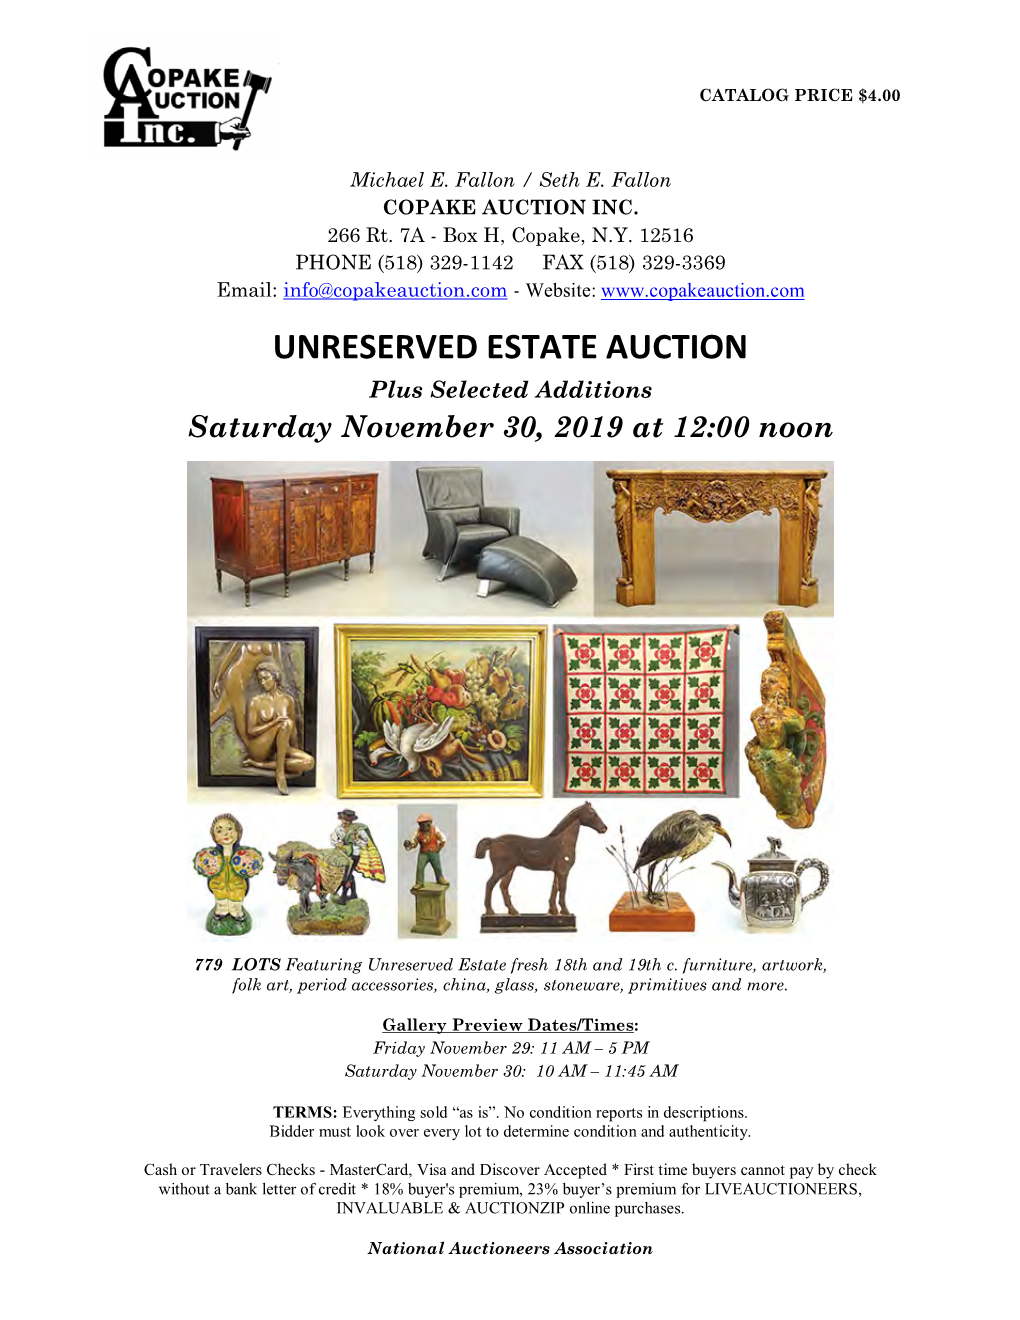 UNRESERVED ESTATE AUCTION Plus Selected Additions Saturday November 30, 2019 at 12:00 Noon